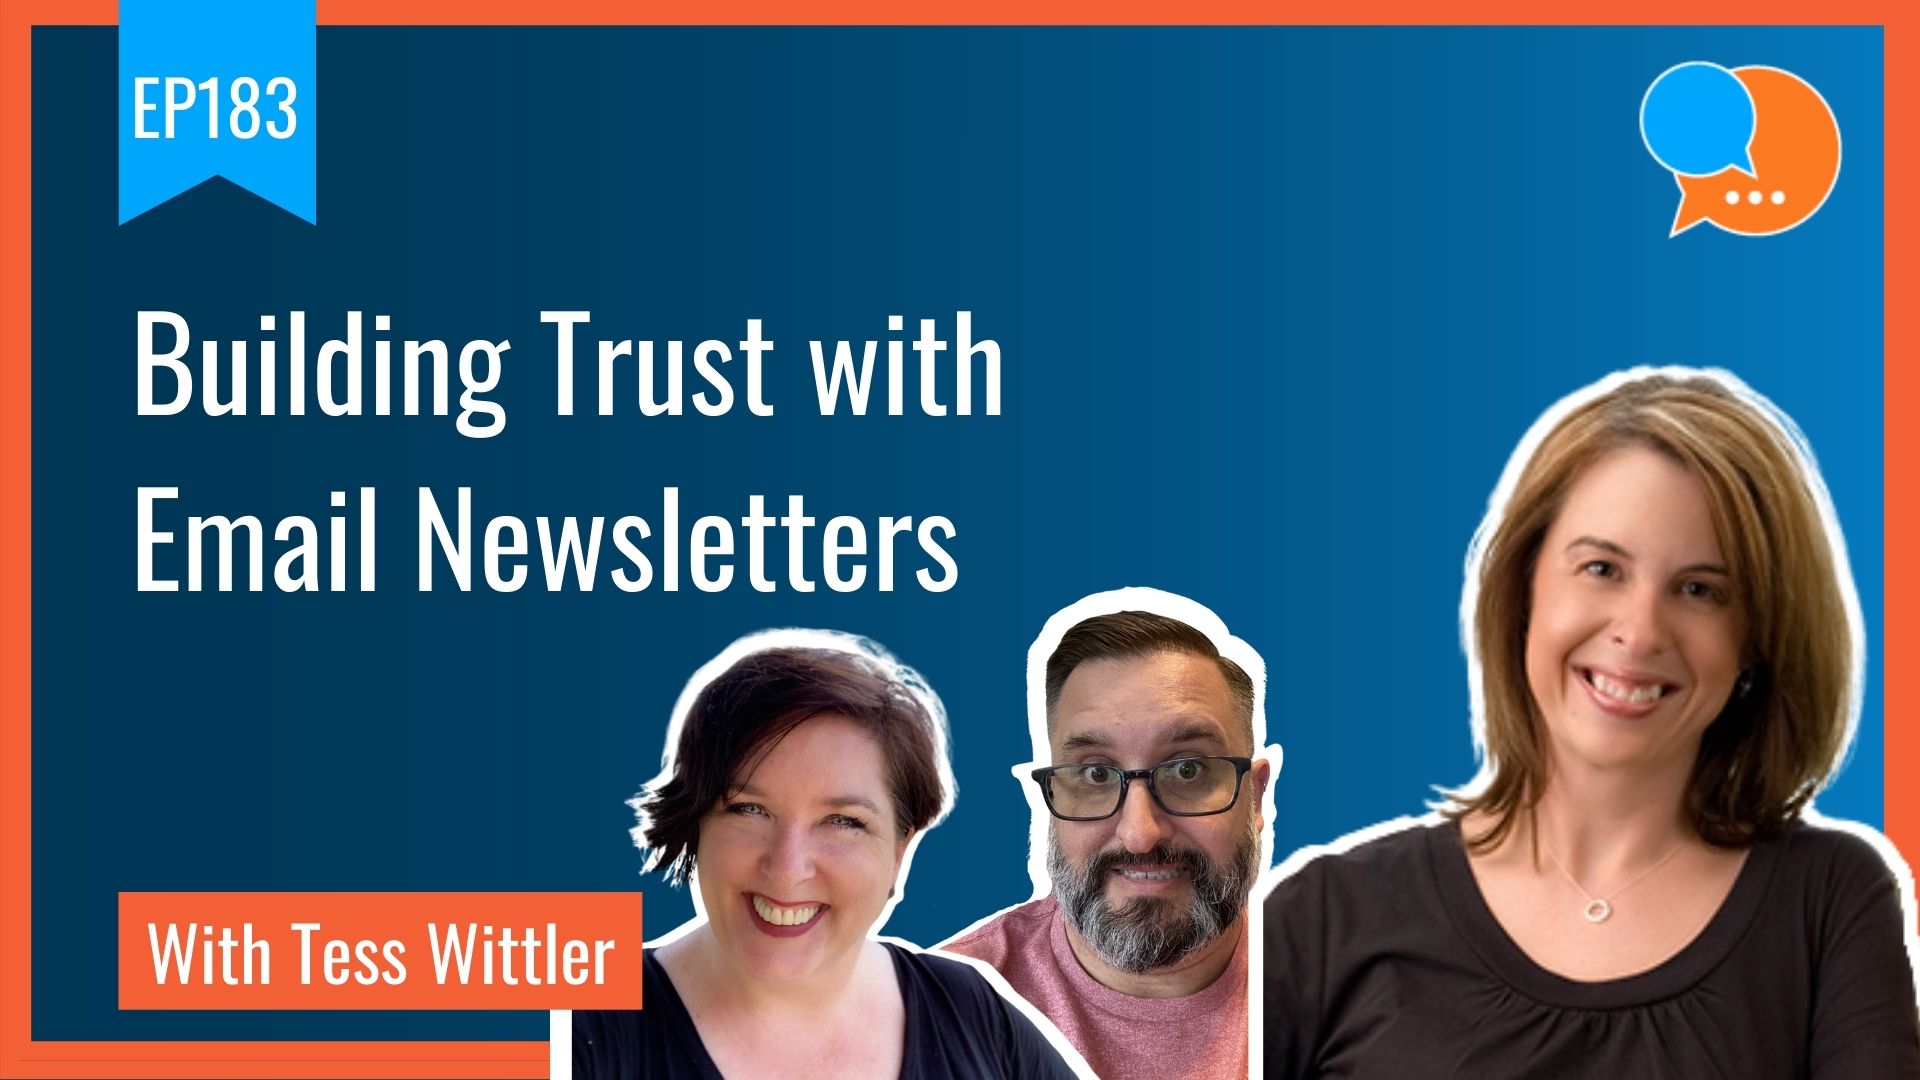 EP183 – Building Trust with Email Newsletters with Tess Wittler